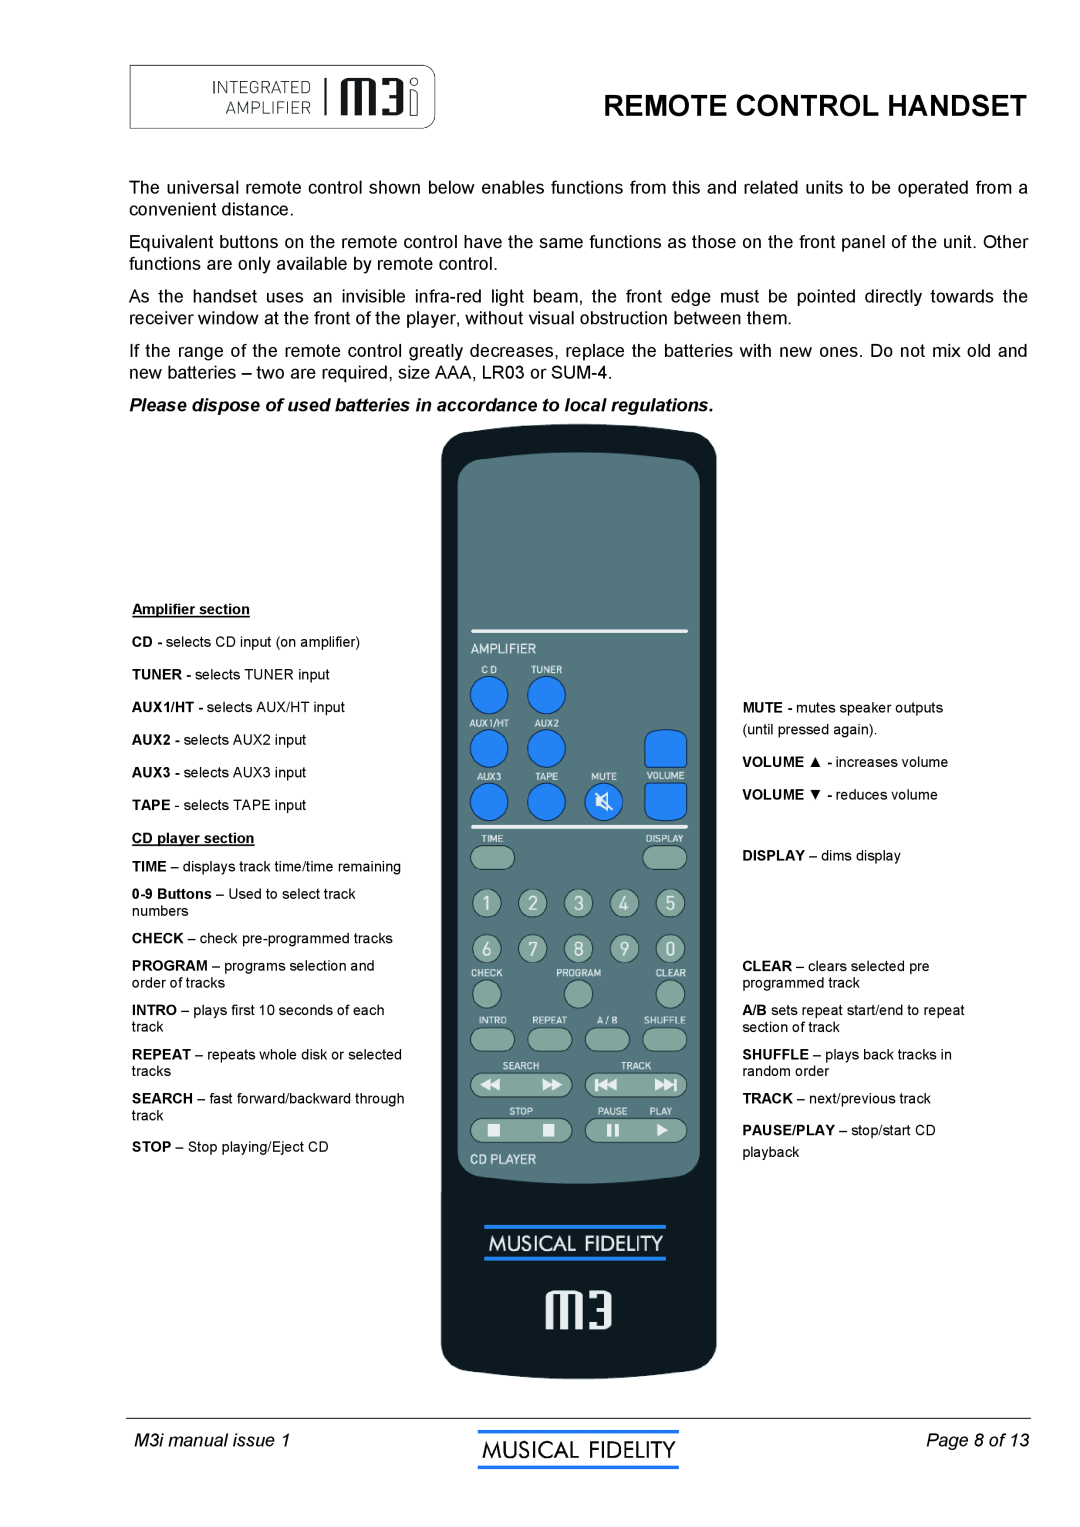 Musical Fidelity M3I Remote Control Handset, M3i manual issue, Page 8 of 